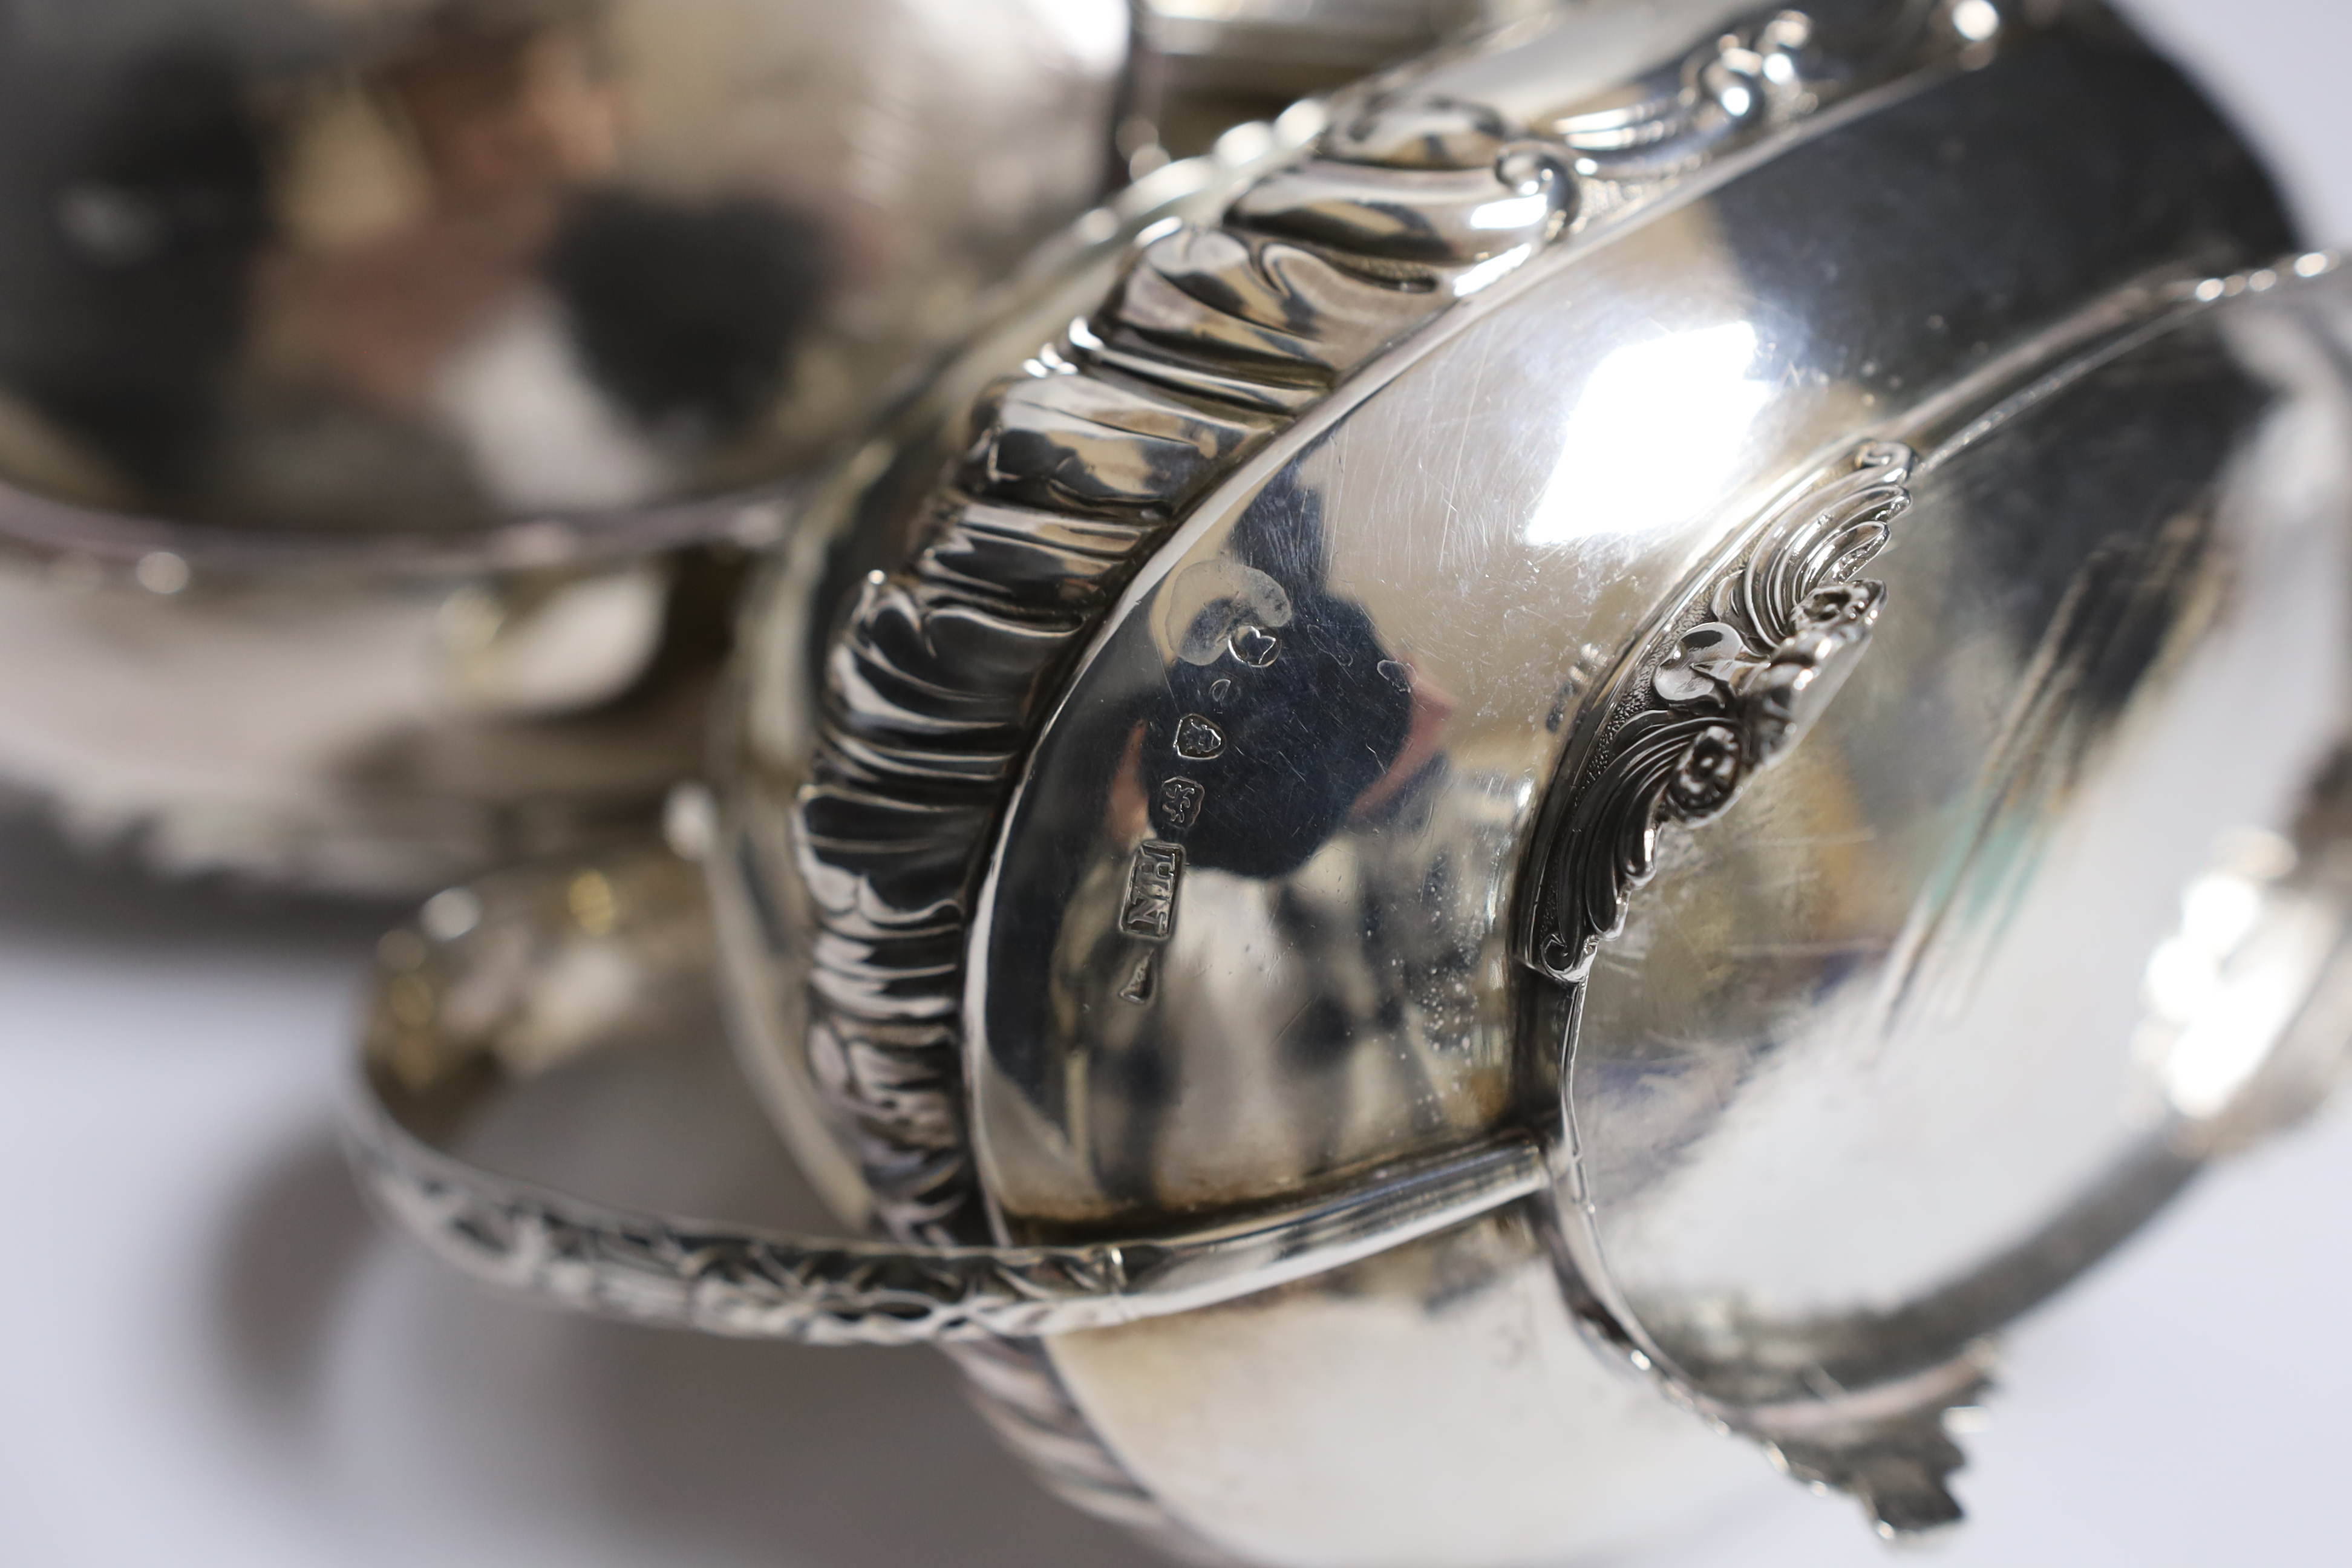 A George IV silver three piece oval tea set, on winged paw feet, by Naphtali Hart, London 1820, gross weight 39.4oz. CITES Submission reference WPRX4YEC